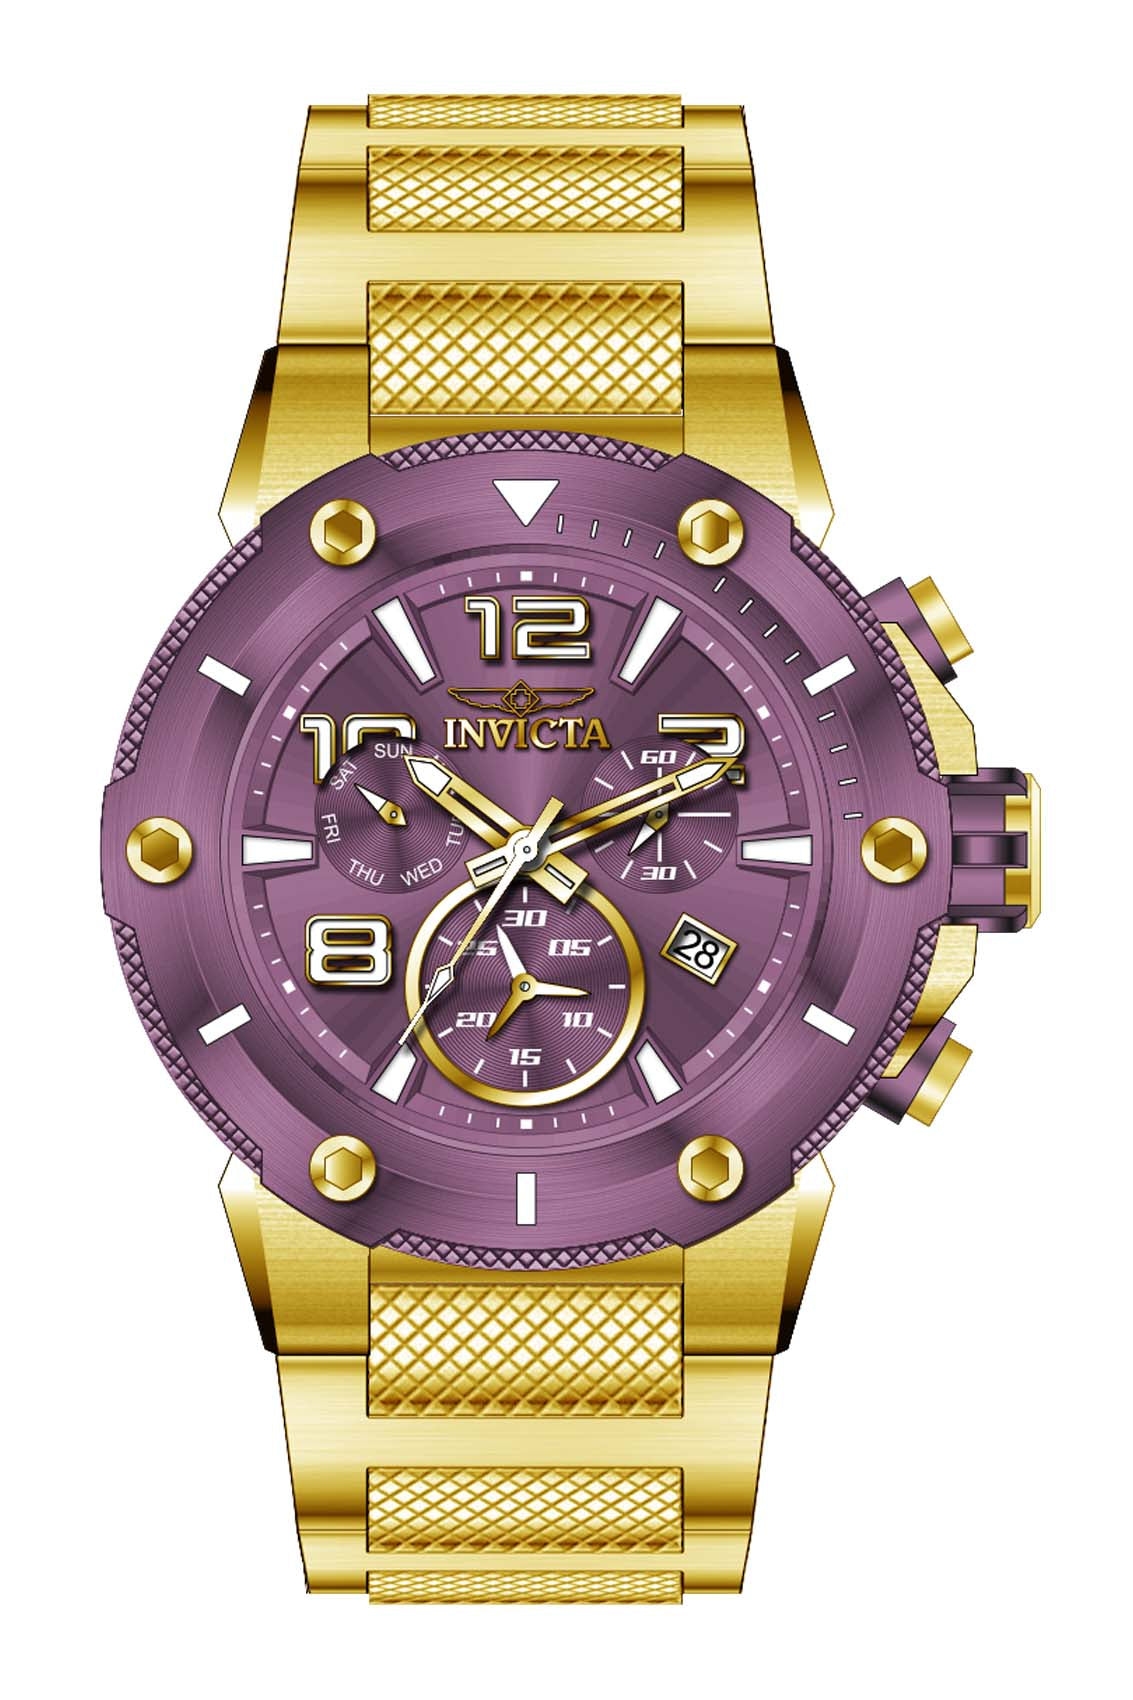 Band for Invicta Speedway Men 40625